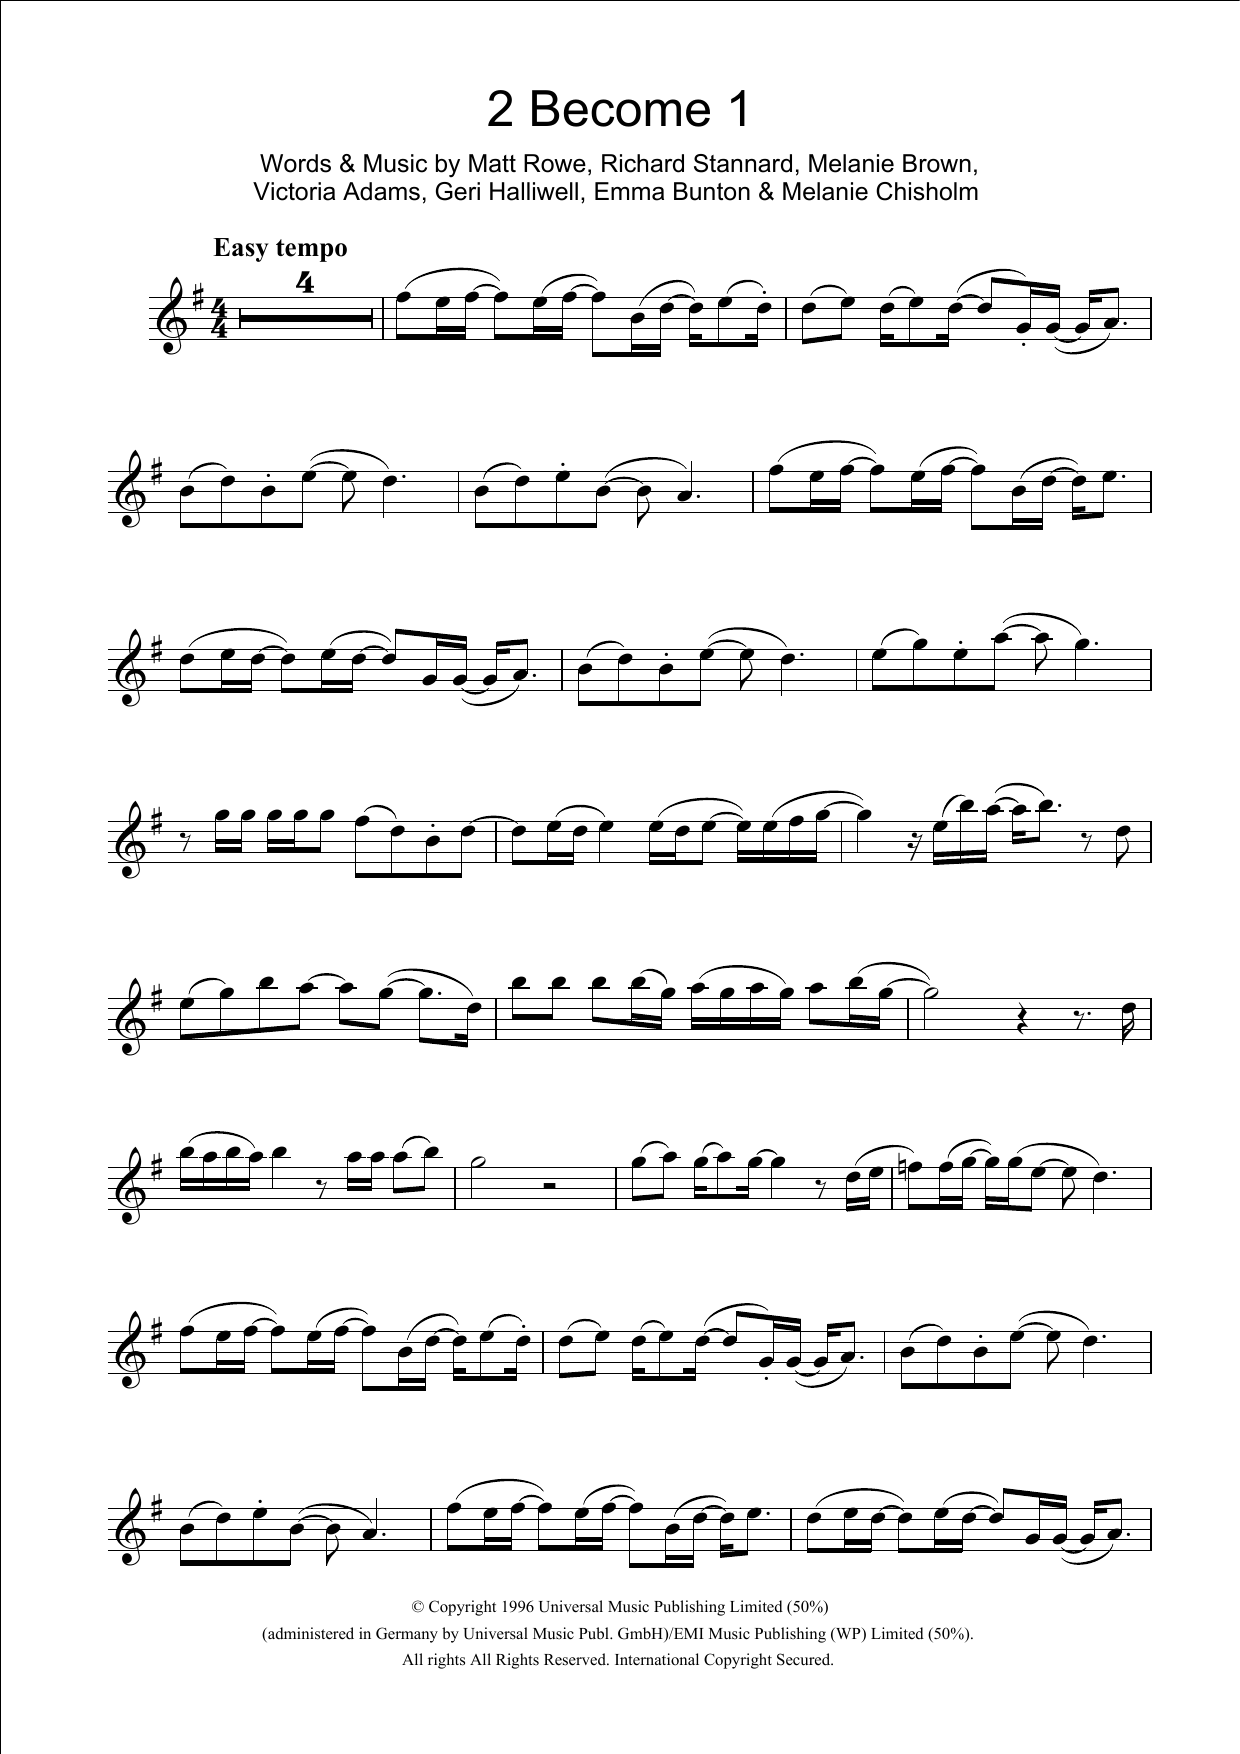 Download The Spice Girls 2 Become 1 Sheet Music